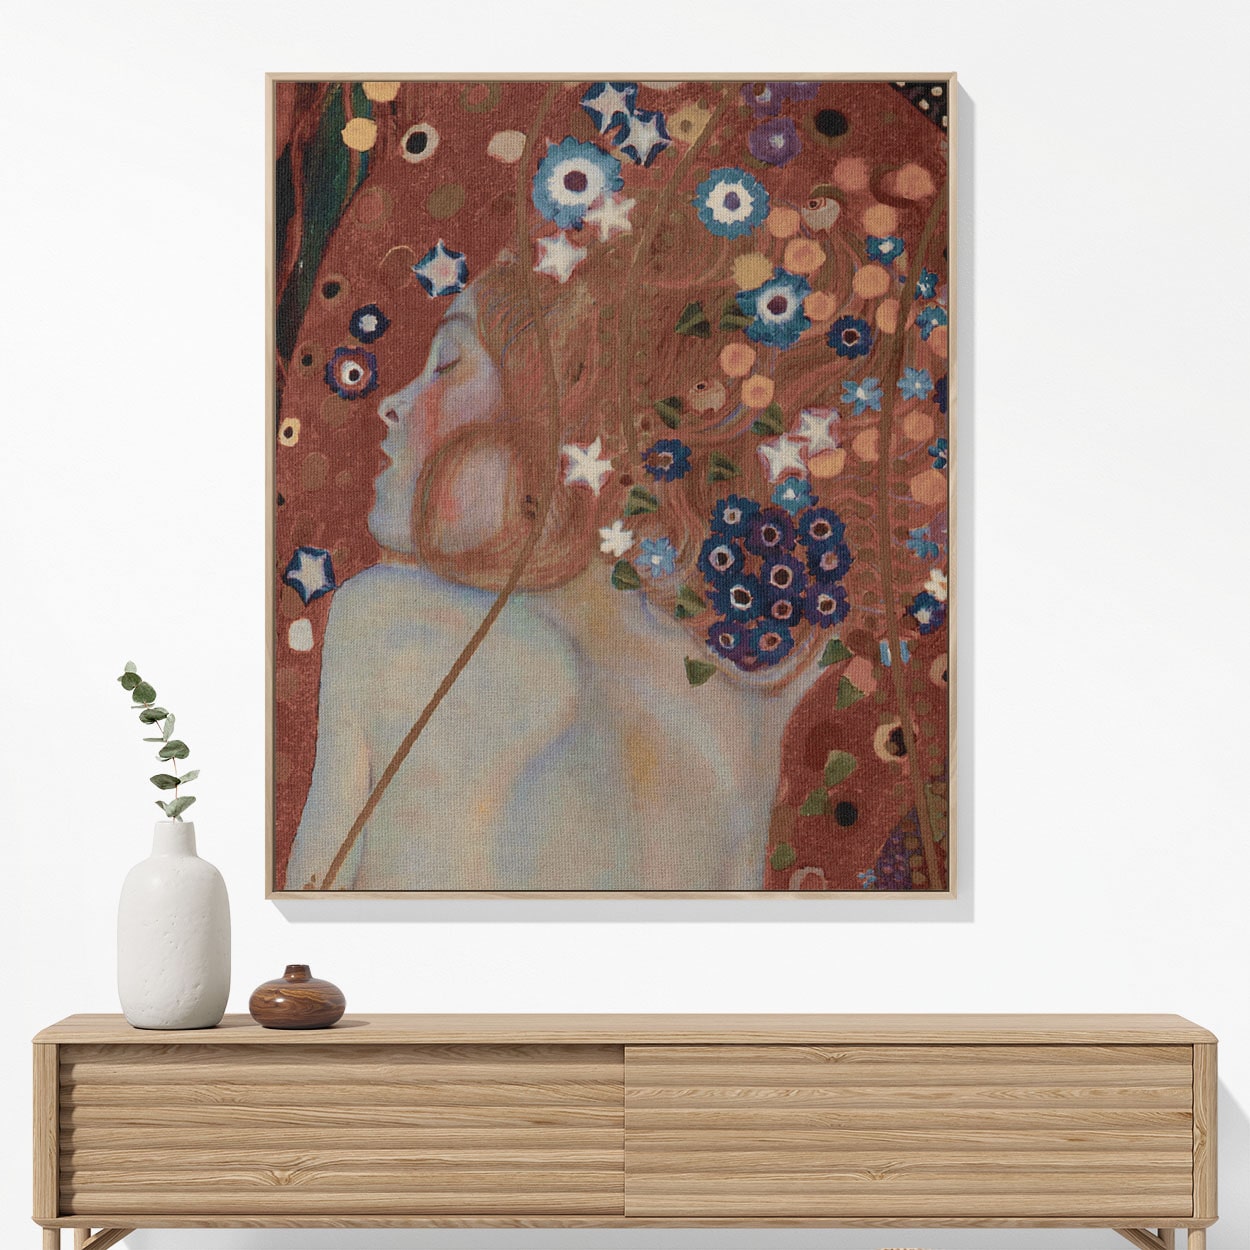 Woman with Flower Hair Woven Blanket Hanging on a Wall as Framed Wall Art